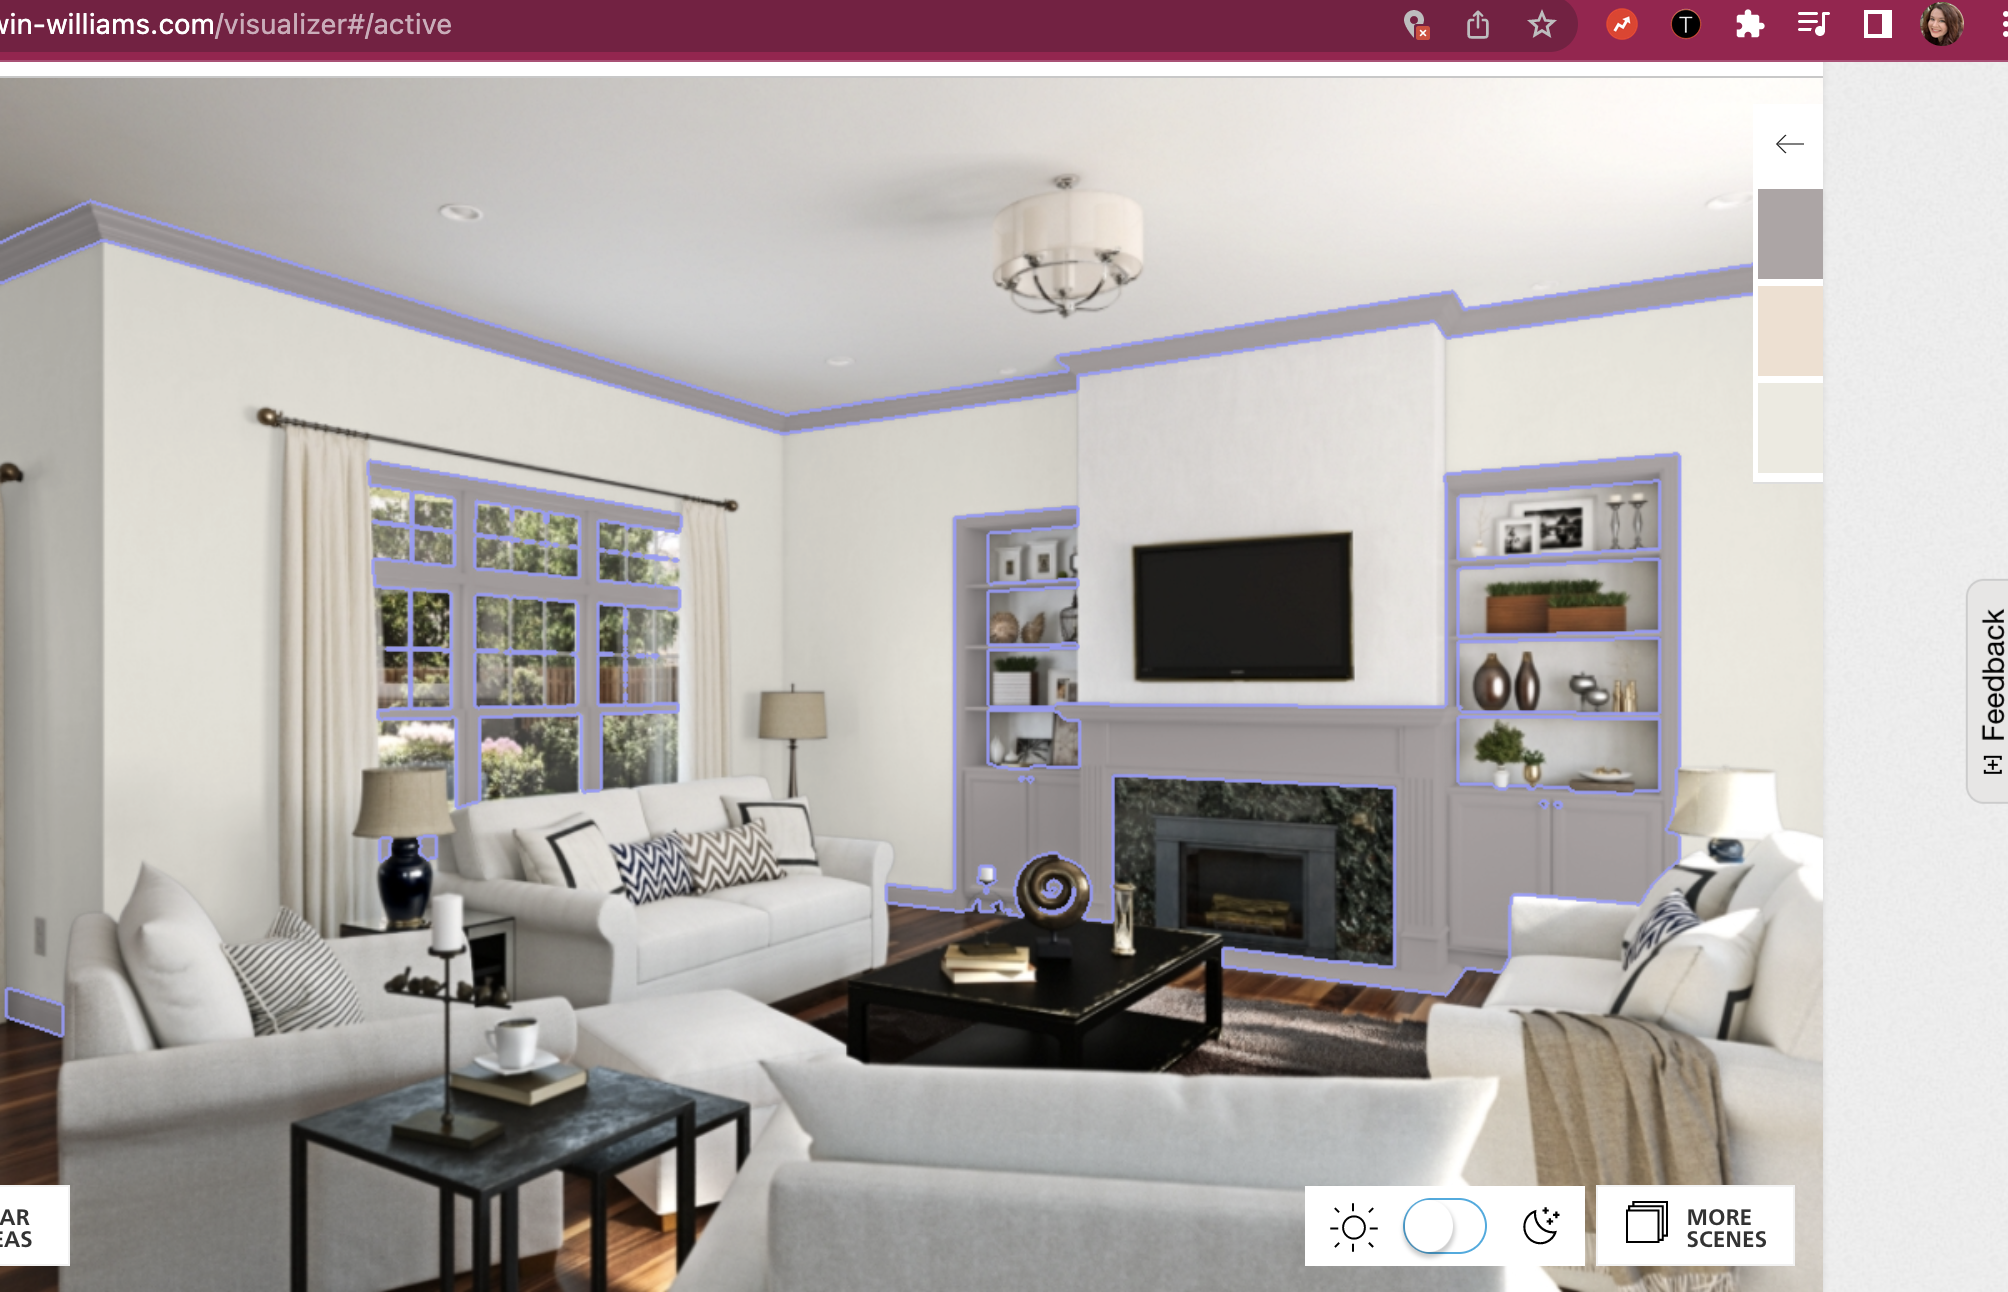 mock up of a living room with paint colors